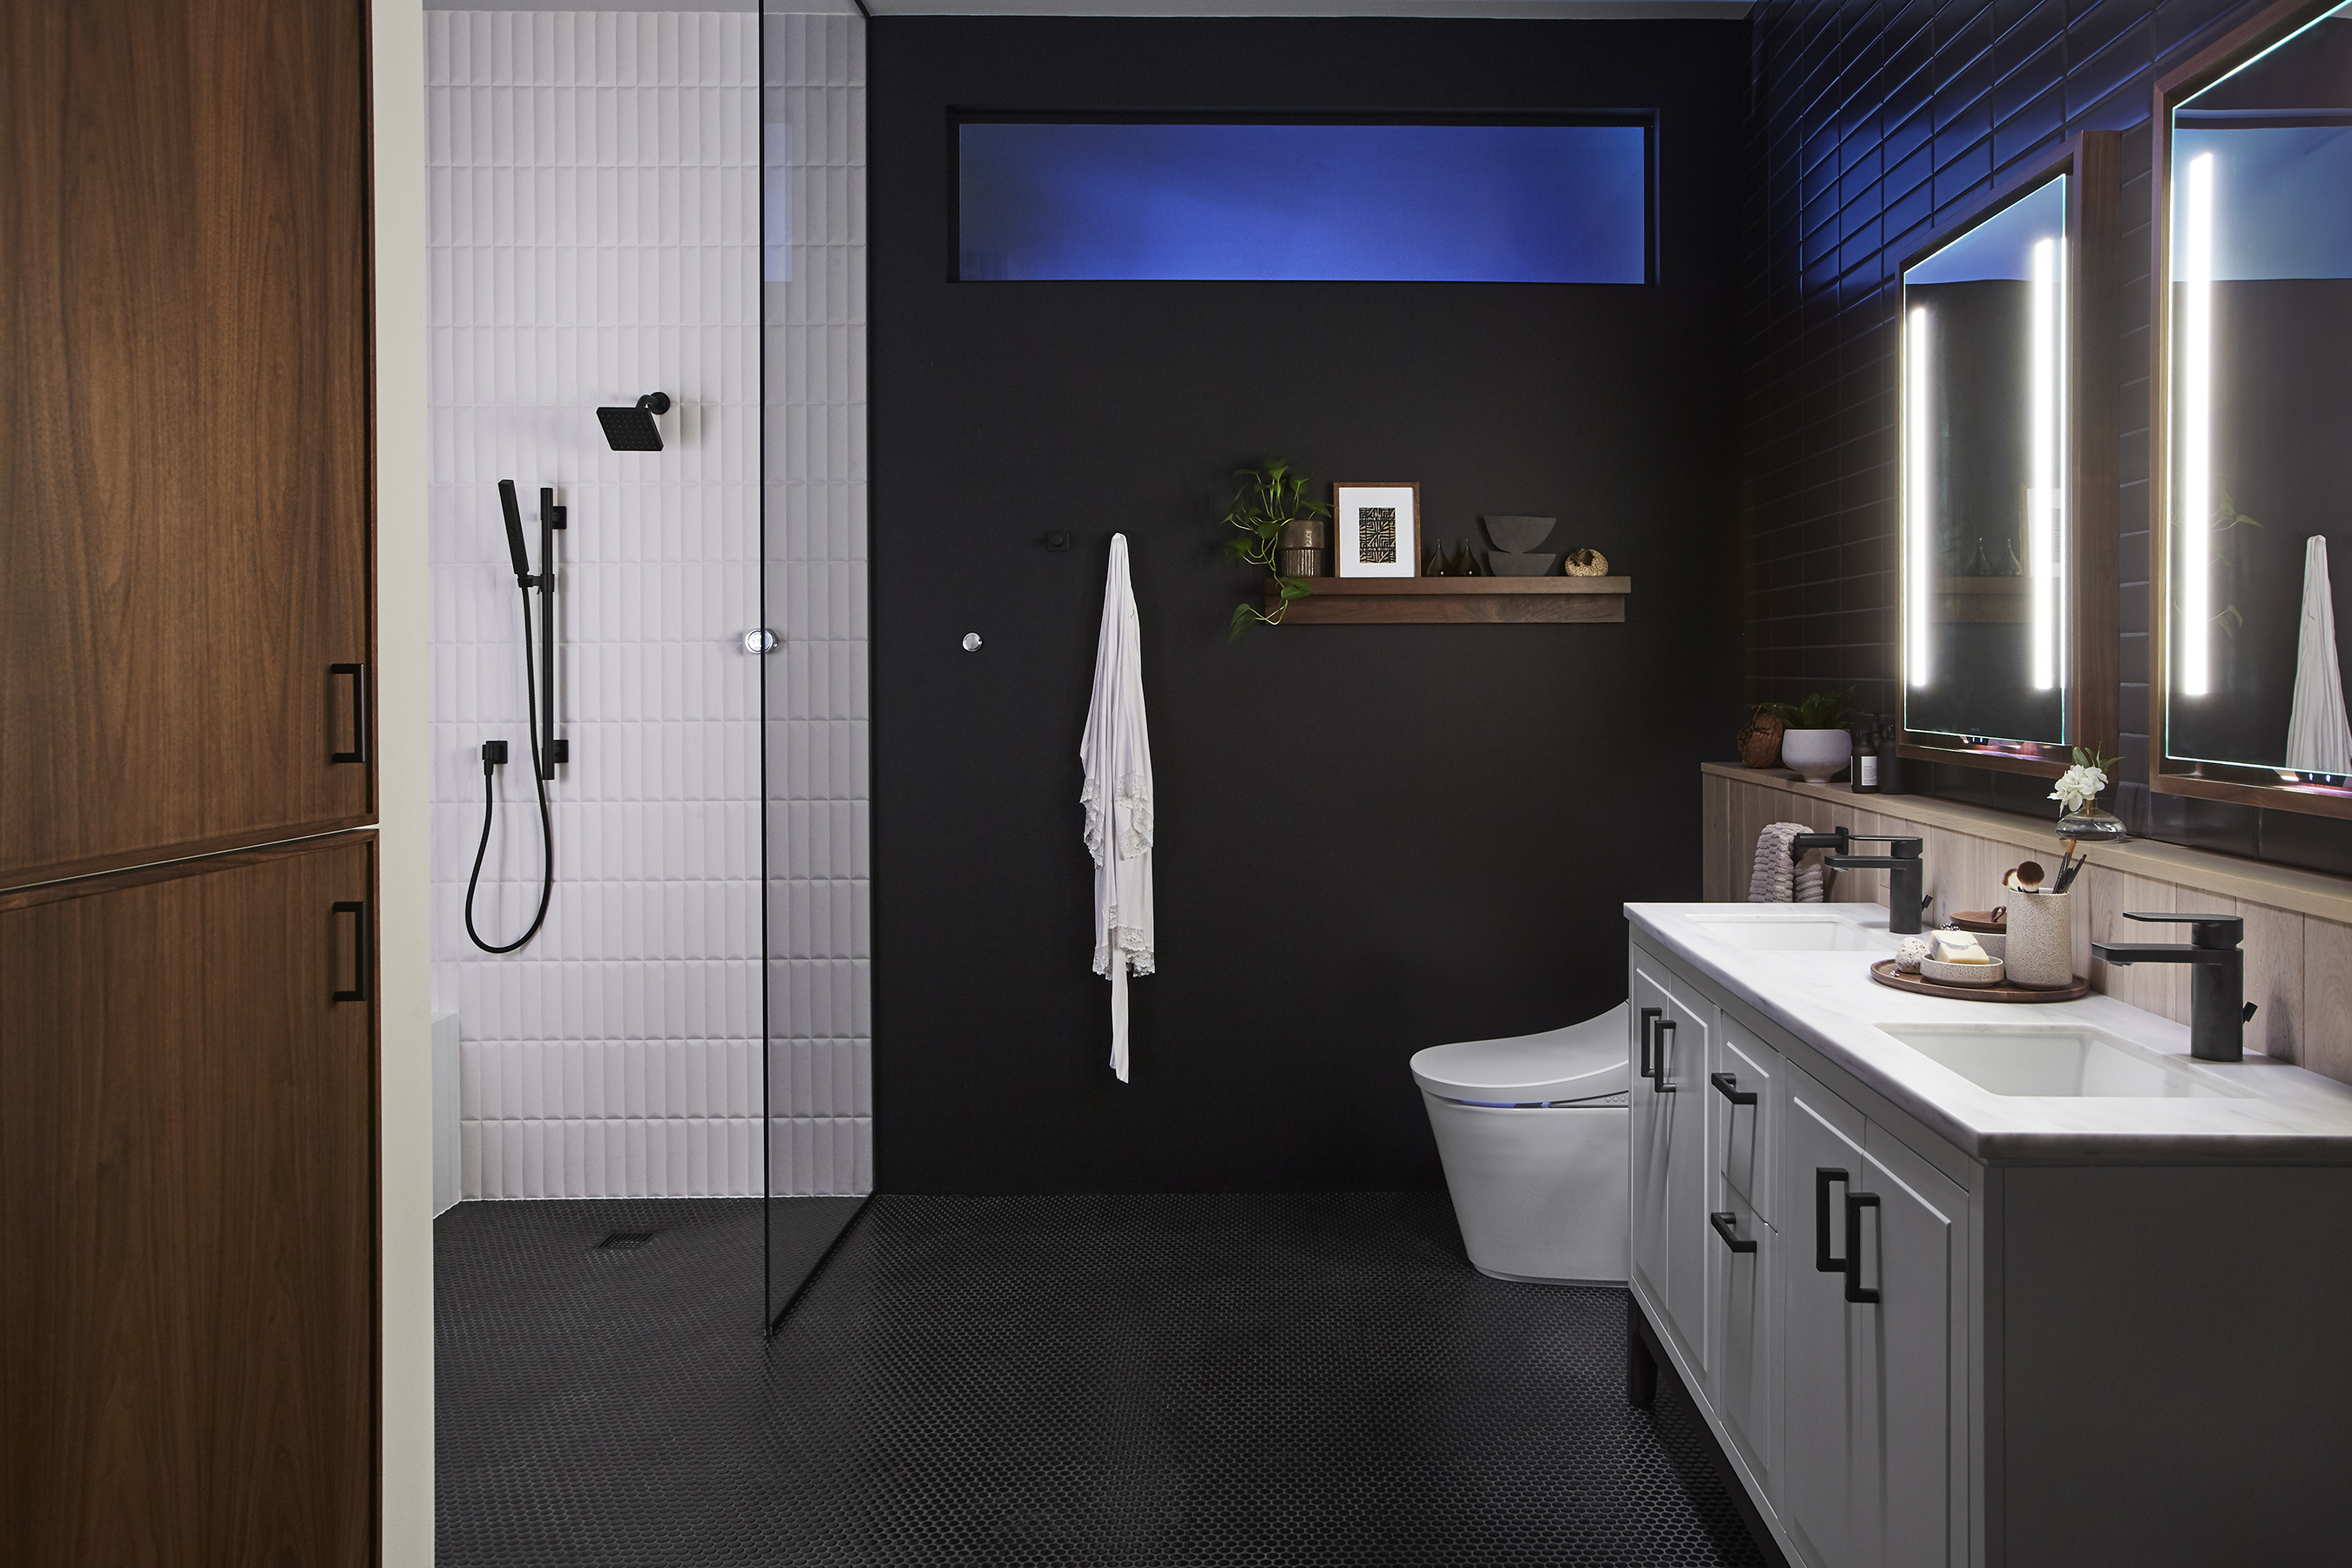 Kohler Expands Smart Home Products to Emphasize Wellness, Touchless Living